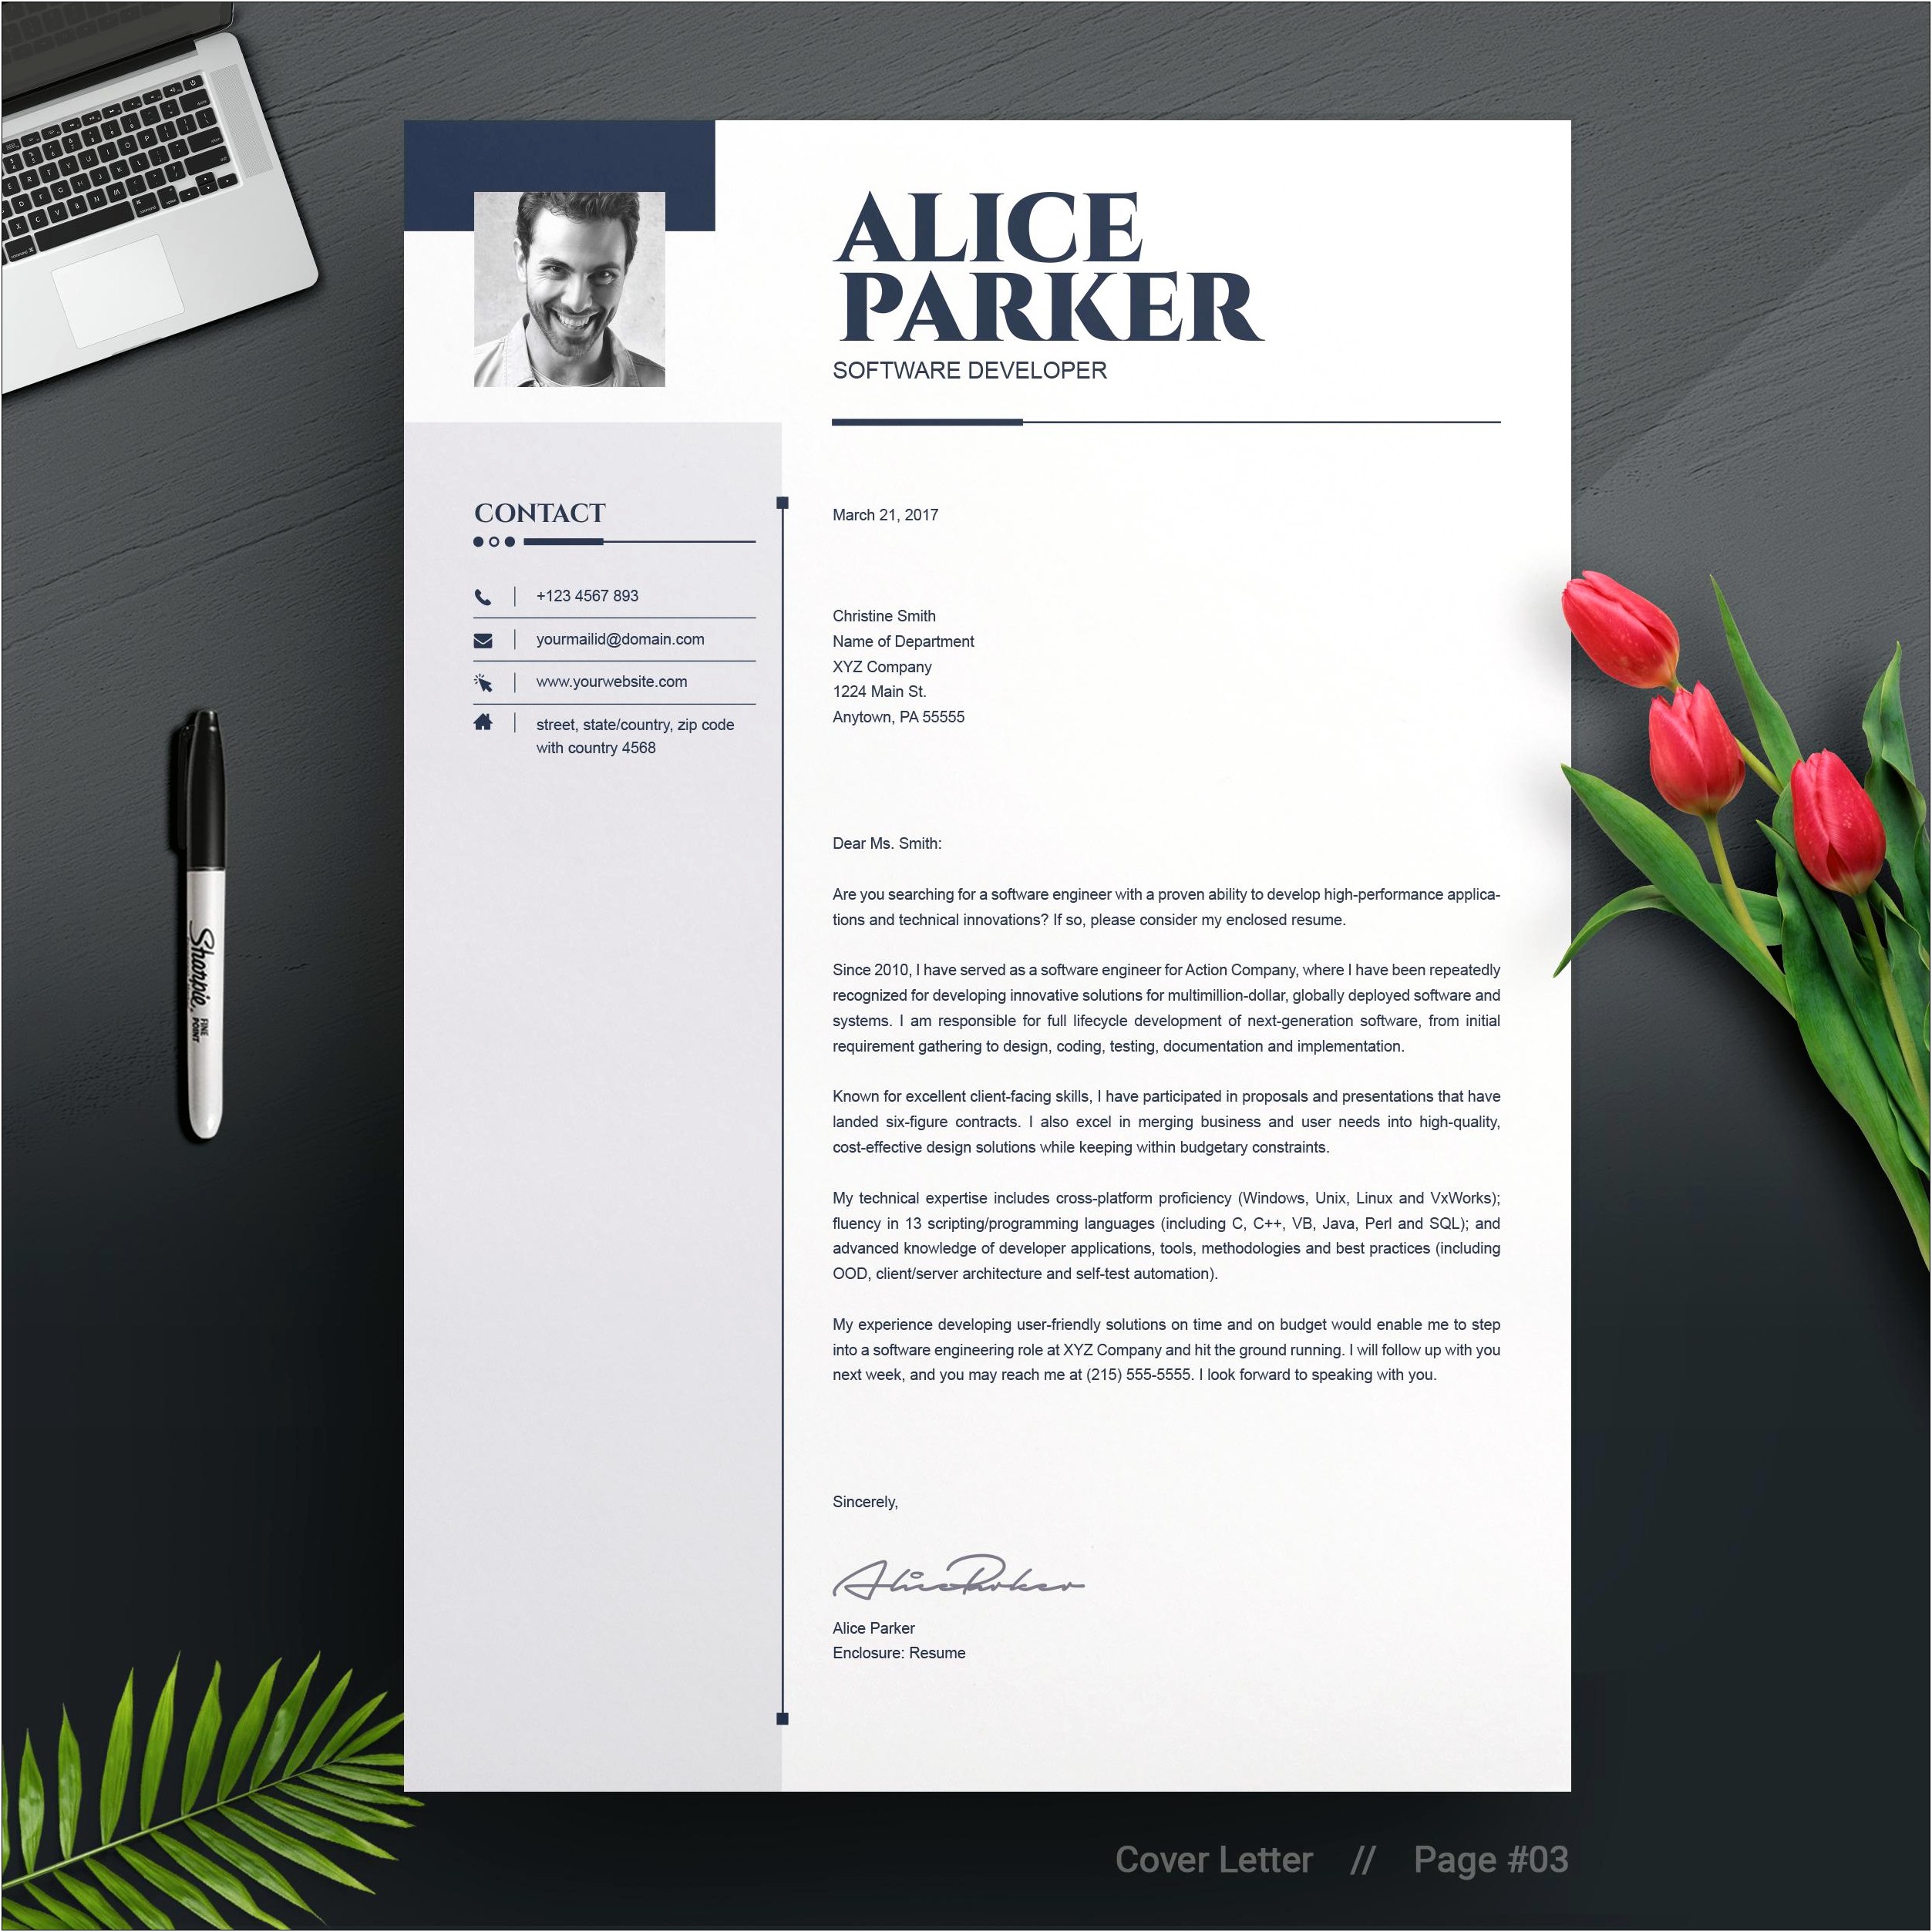 Designing A Cover Letter For Resume